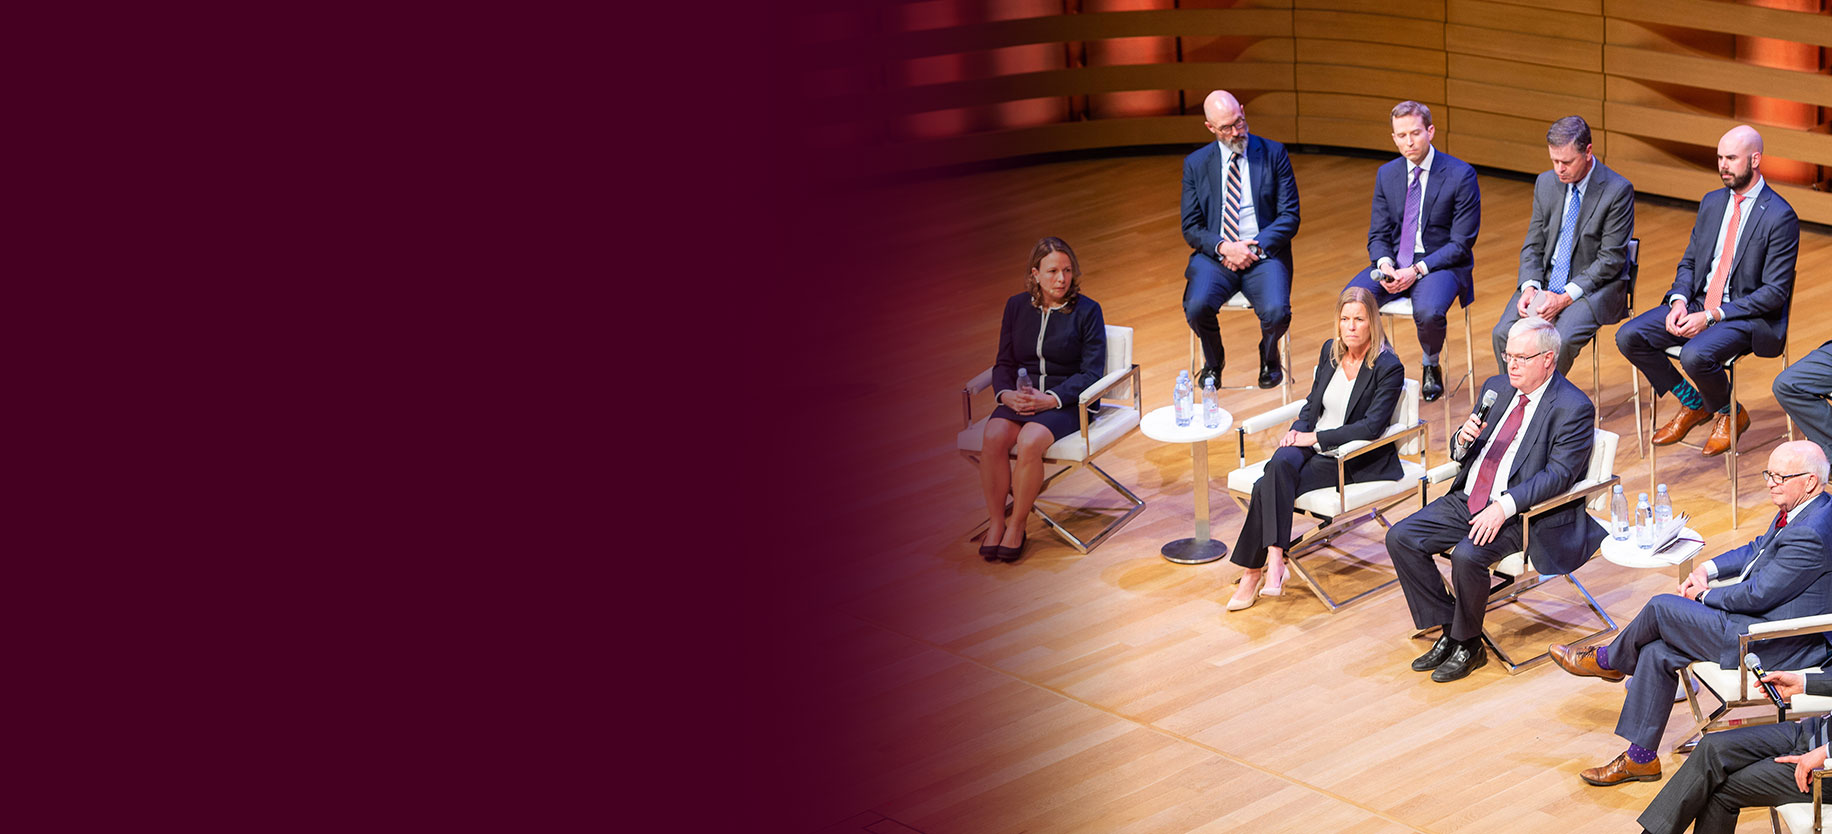 Members of Burgundy's Investment Team onstage at the annual Burgundy Forum